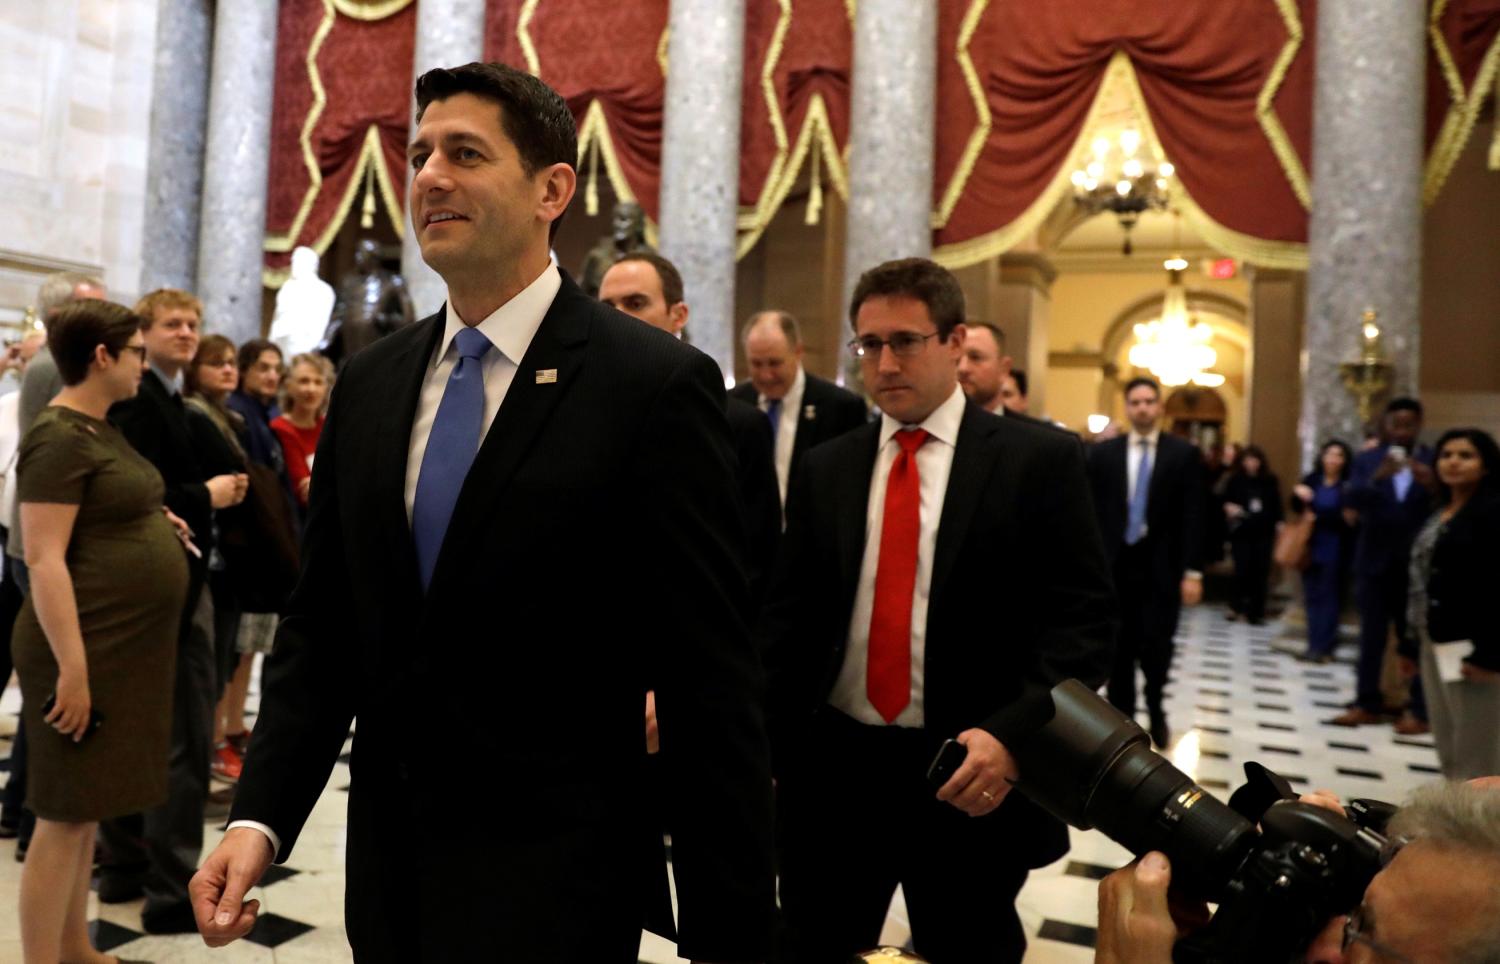 Speaker of the House Paul Ryan walks from the House Chamber after the U.S. House of Representatives approved a bill on Thursday to repeal major parts of Obamacare and replace it with a Republican healthcare plan in Washington, U.S., May 4, 2017. REUTERS/Kevin Lamarque TPX IMAGES OF THE DAY - RTS157JJ